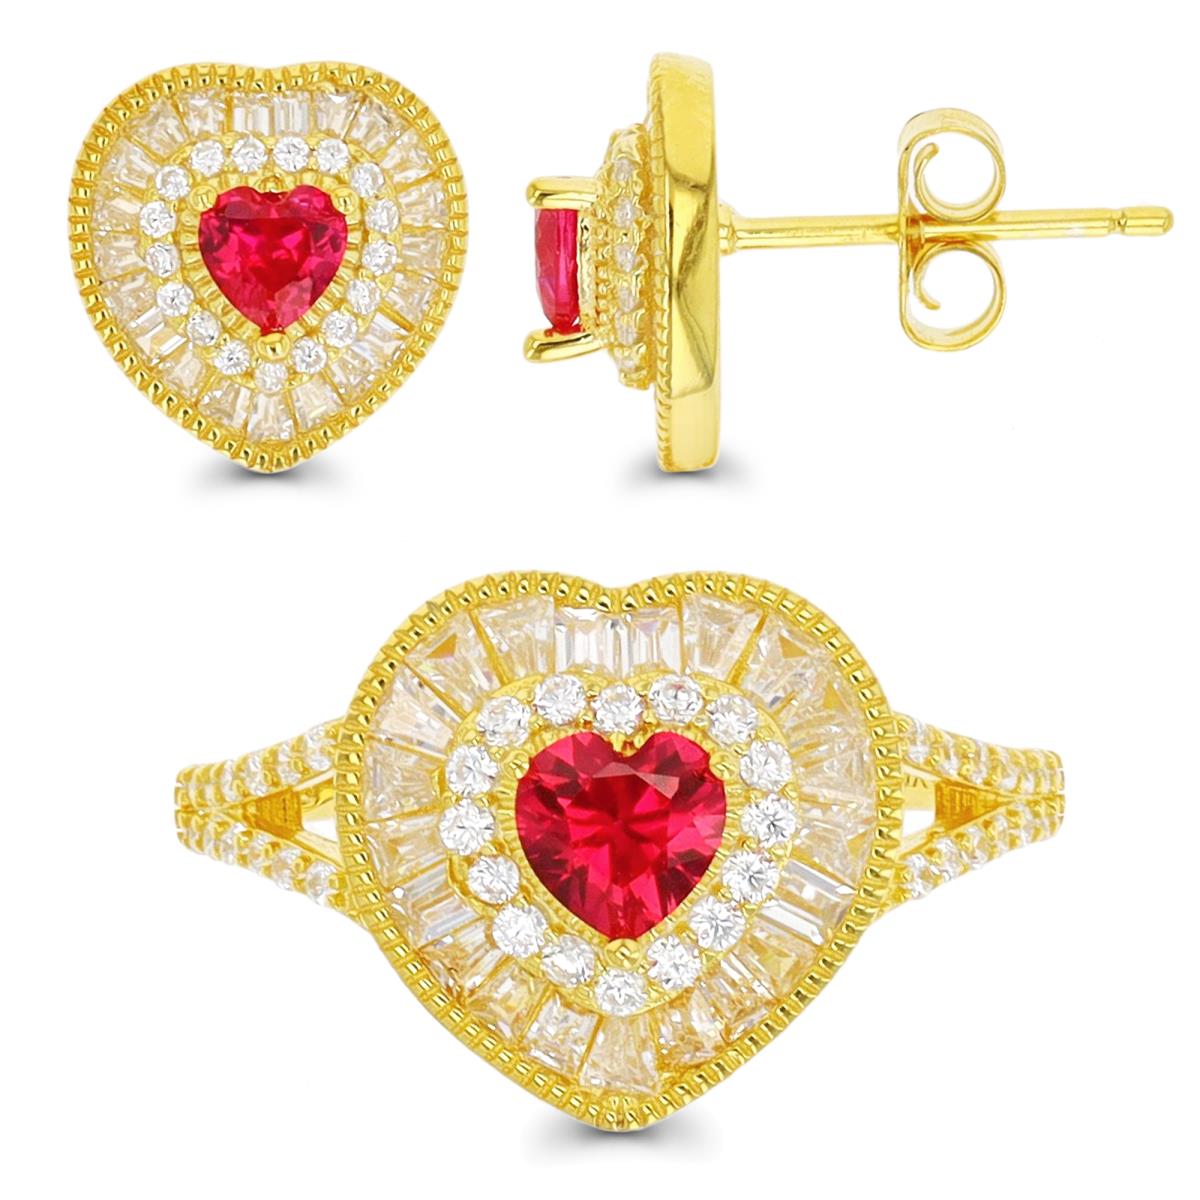 Sterling Silver Yellow Ruby Heart Rd/Bgt Fashion Ring and Earring Set